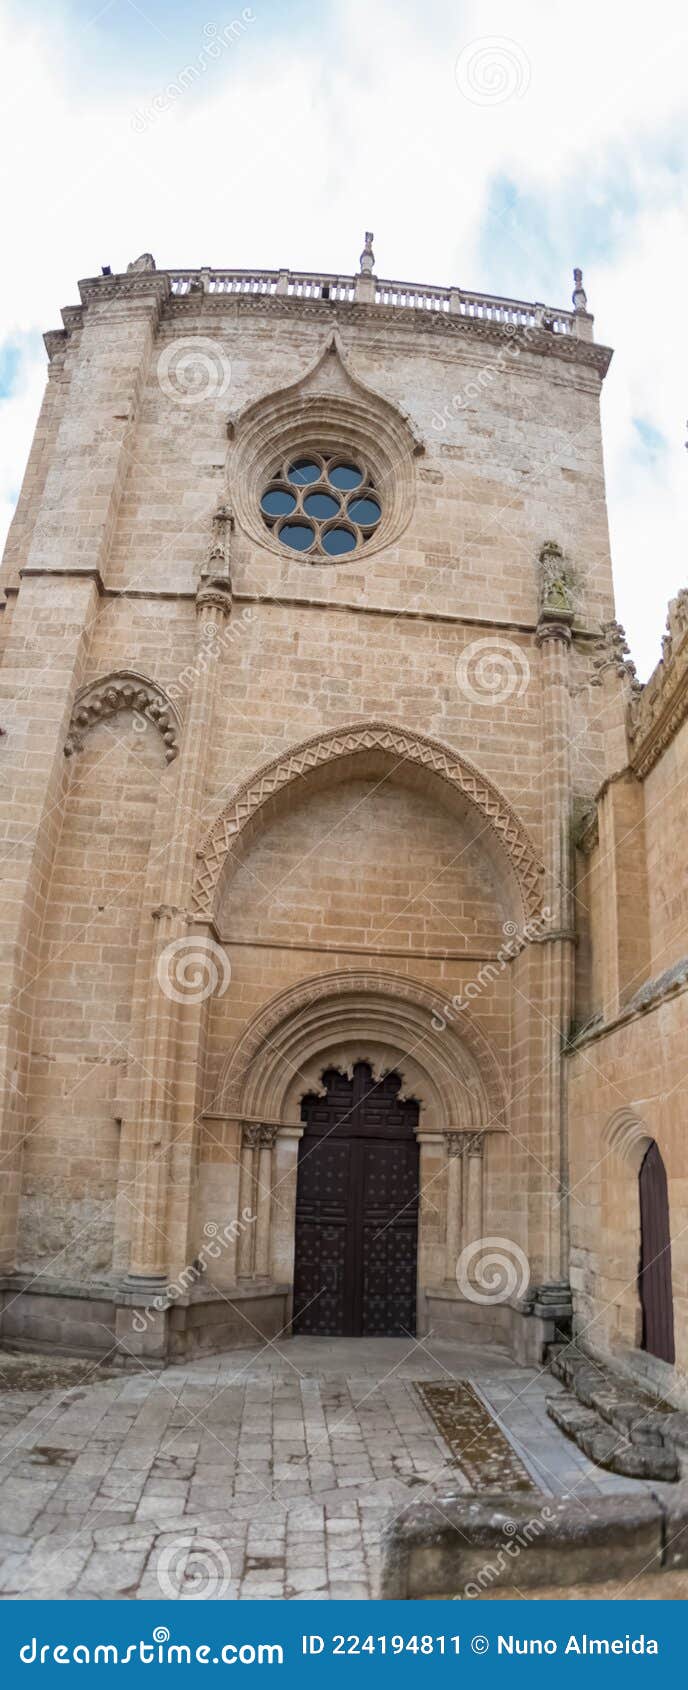 detailed lateral facade view at the iconic spanish romanesque architecture building at the cuidad rodrigo cathedral, downtown city